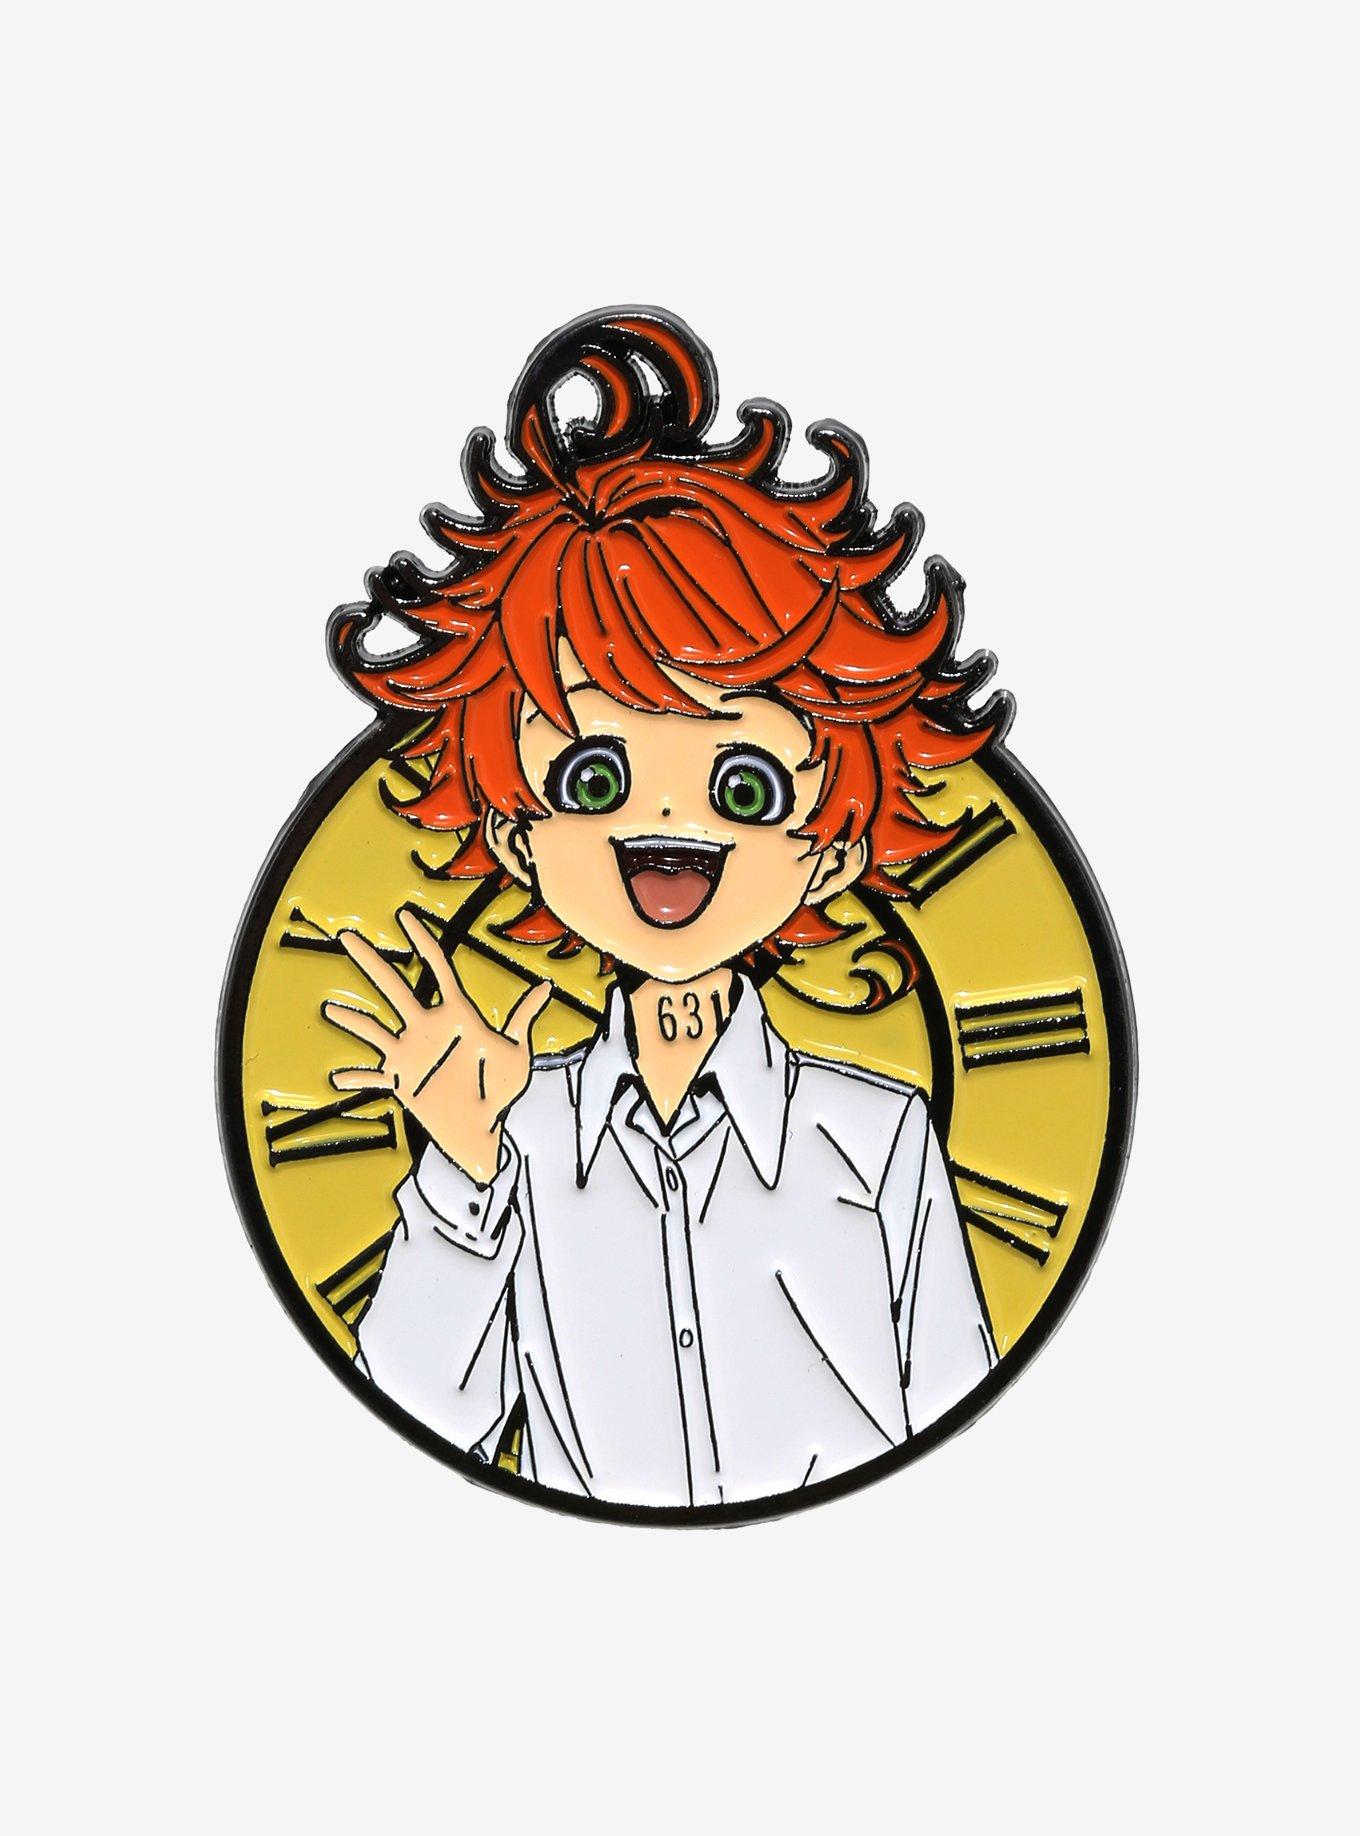 Pin em The Promised Neverland